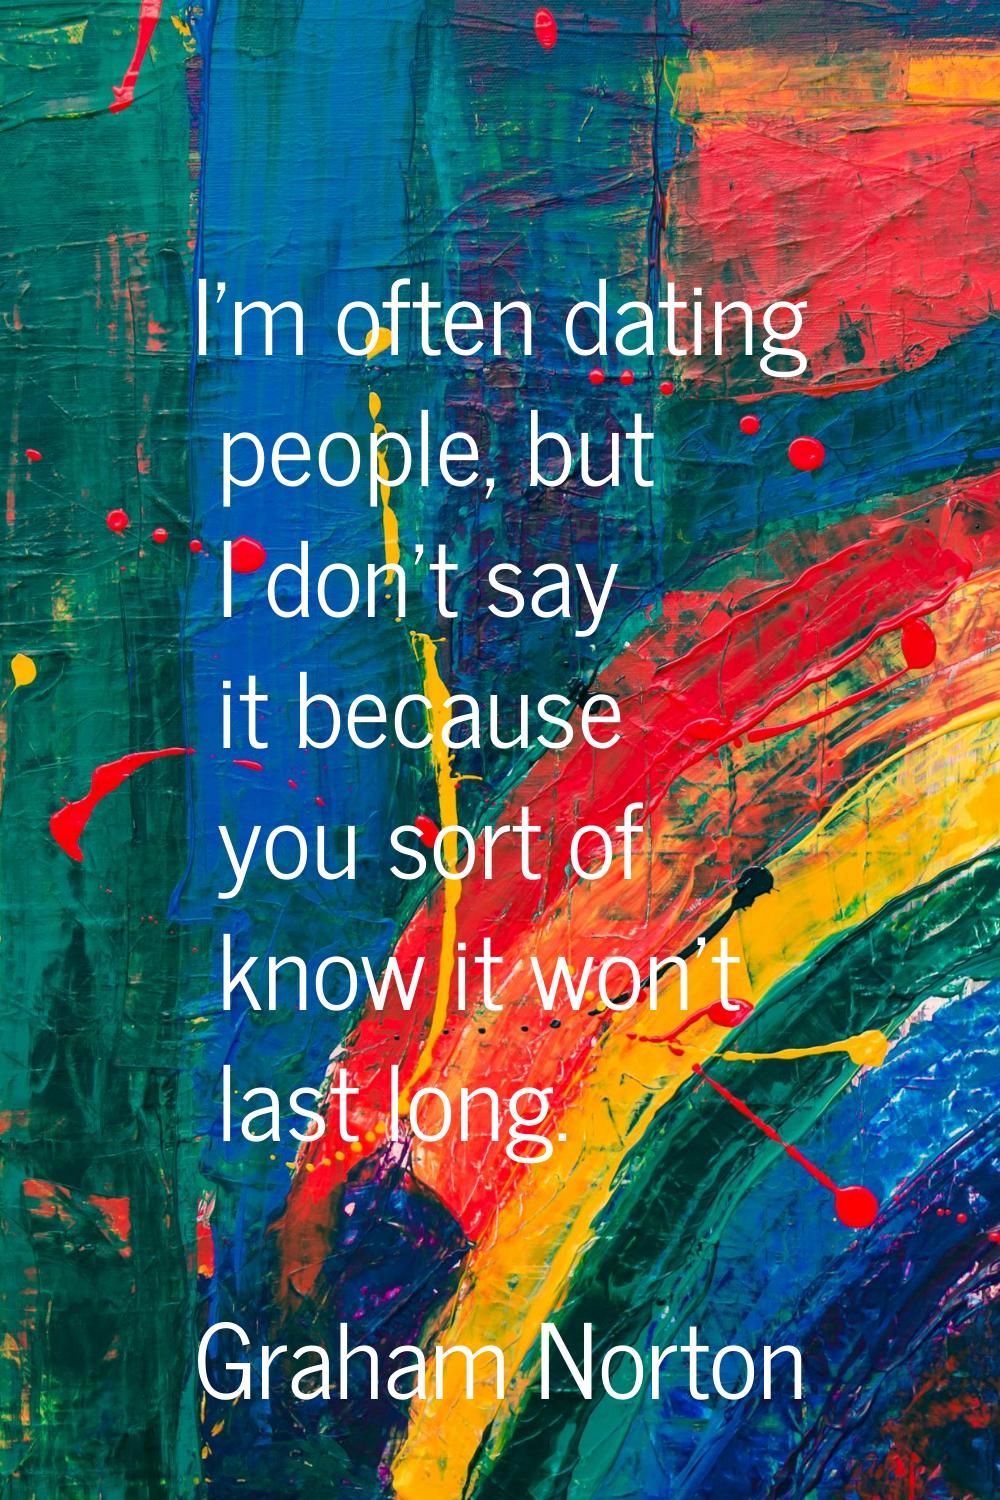 I'm often dating people, but I don't say it because you sort of know it won't last long.